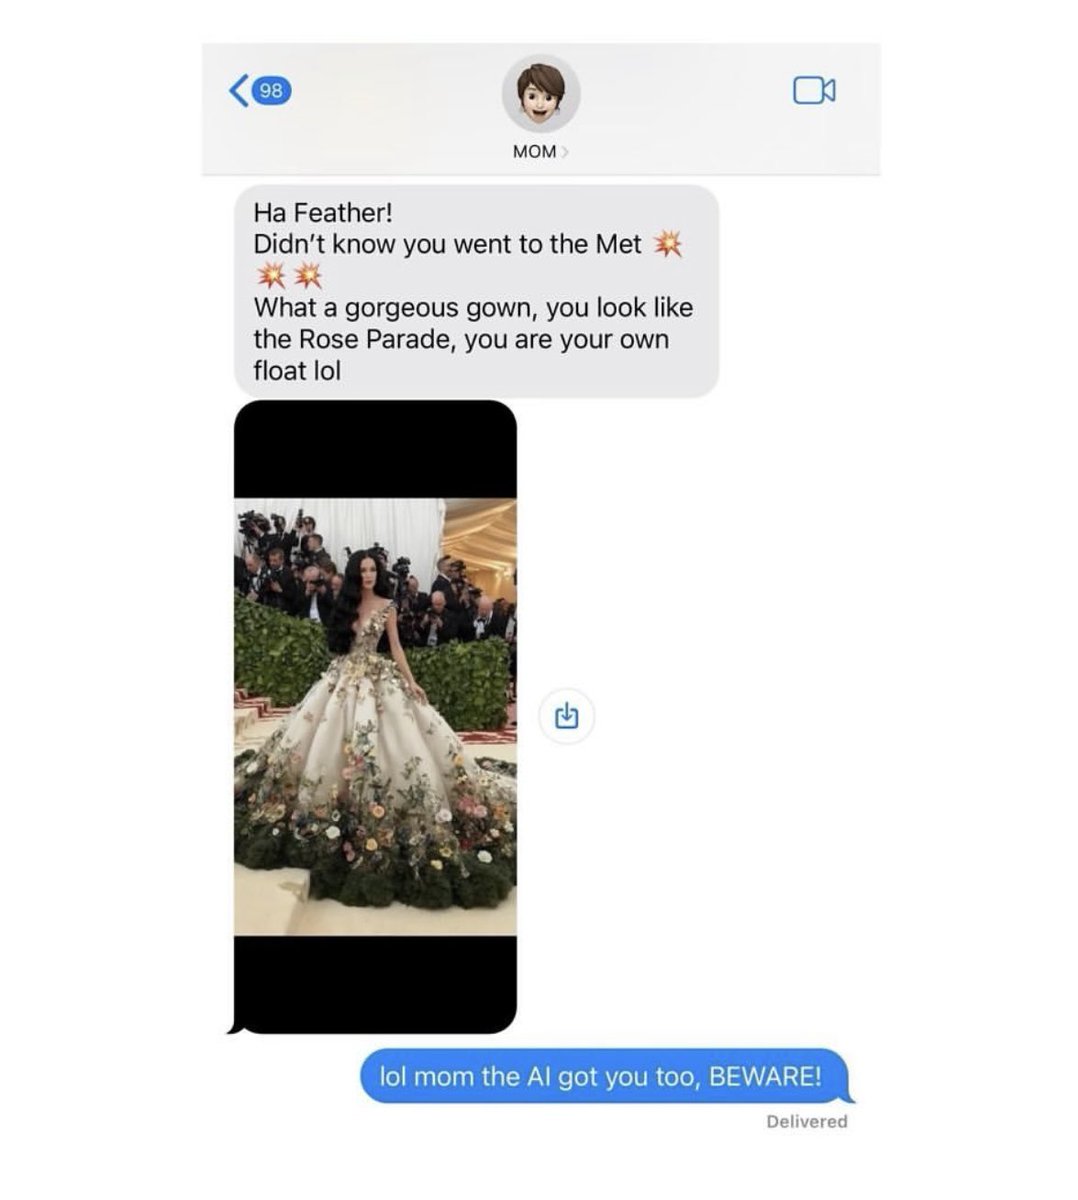 Katy Perry reveals her mom fell for an AI photo of her at the #MetGala.